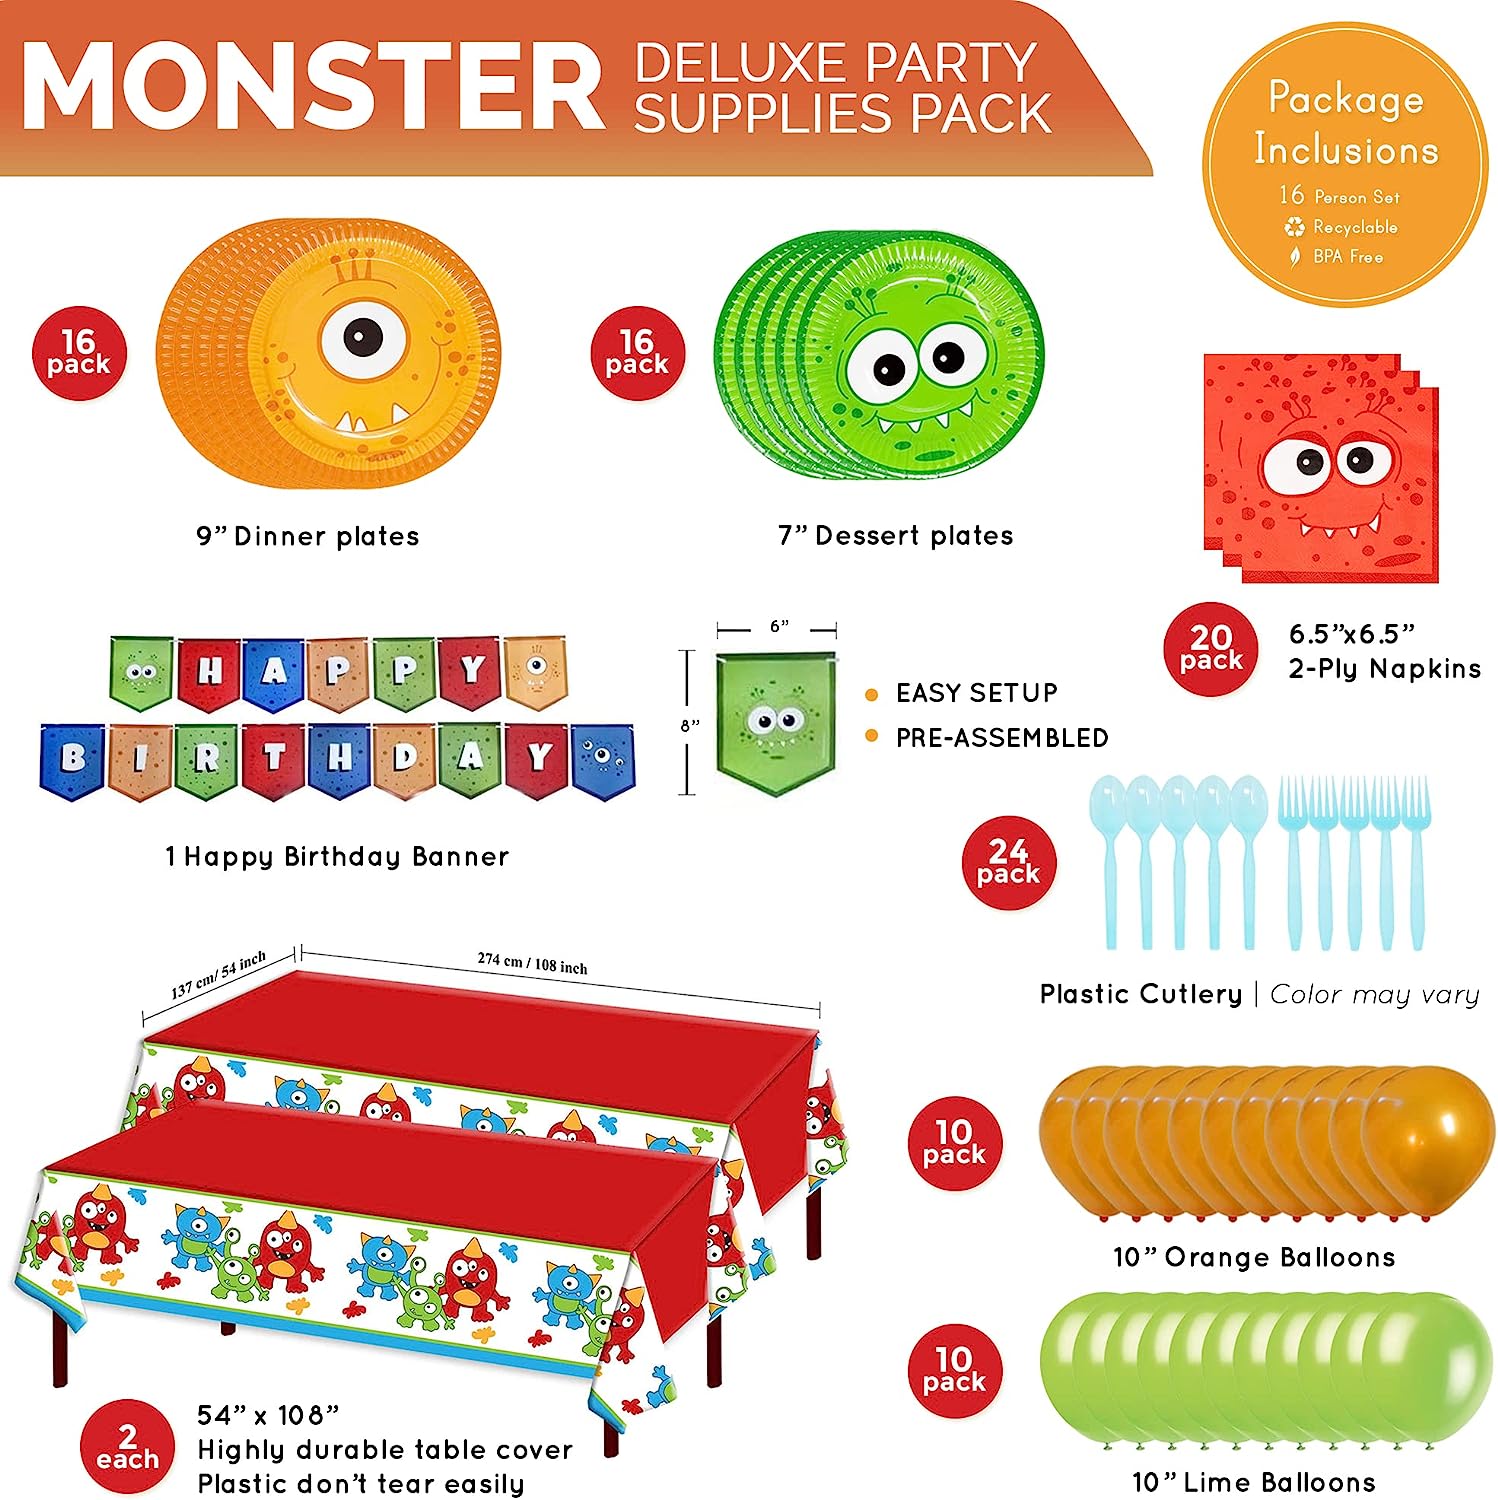 A Monster Party Pack containing 16 9-inch paper dinner plates, 16 7-inch paper dessert plates, 20 paper lunch napkins, 1 banner, 2 108” x 54” plastic table covers, 24 plastic forks, 24 plastic spoons, 10 orange balloons, and 10 lime balloons.